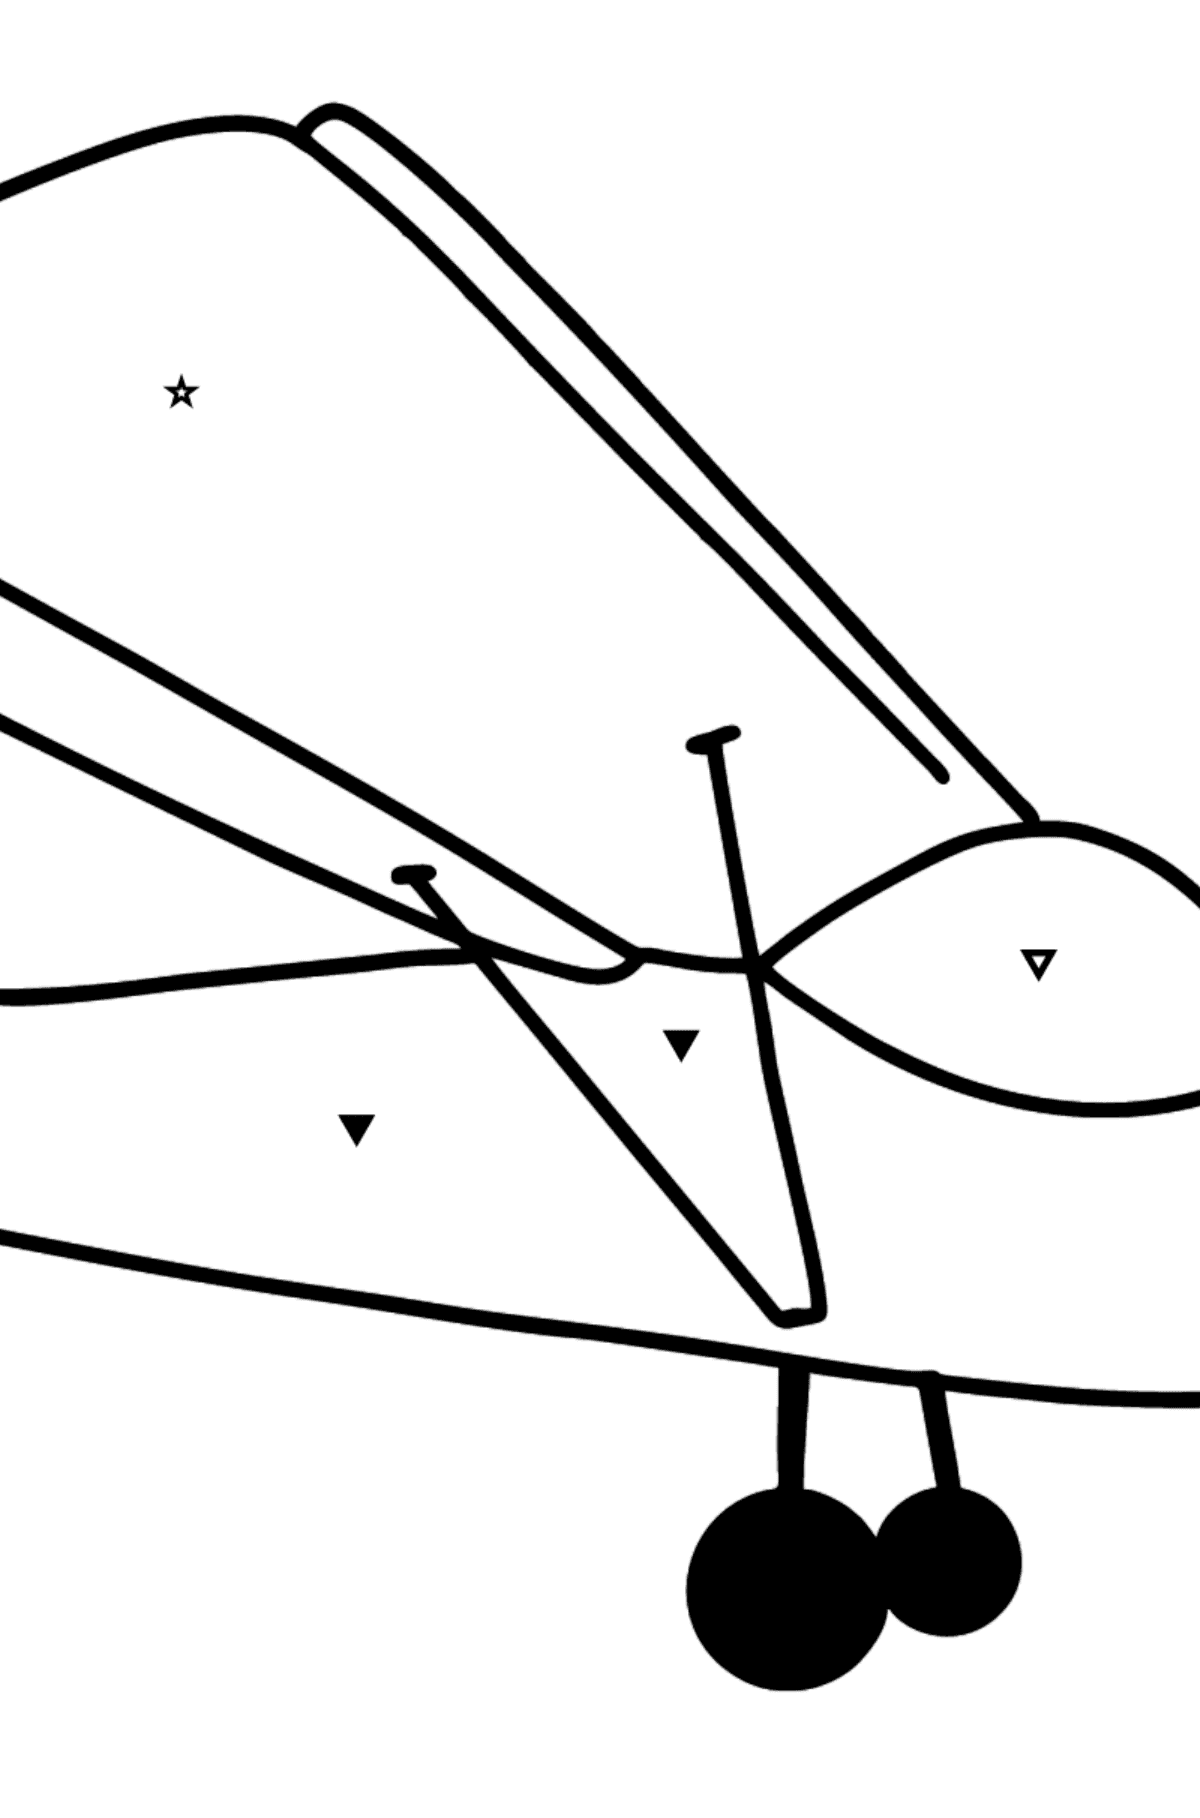 Small Plane coloring page - Coloring by Symbols and Geometric Shapes for Kids